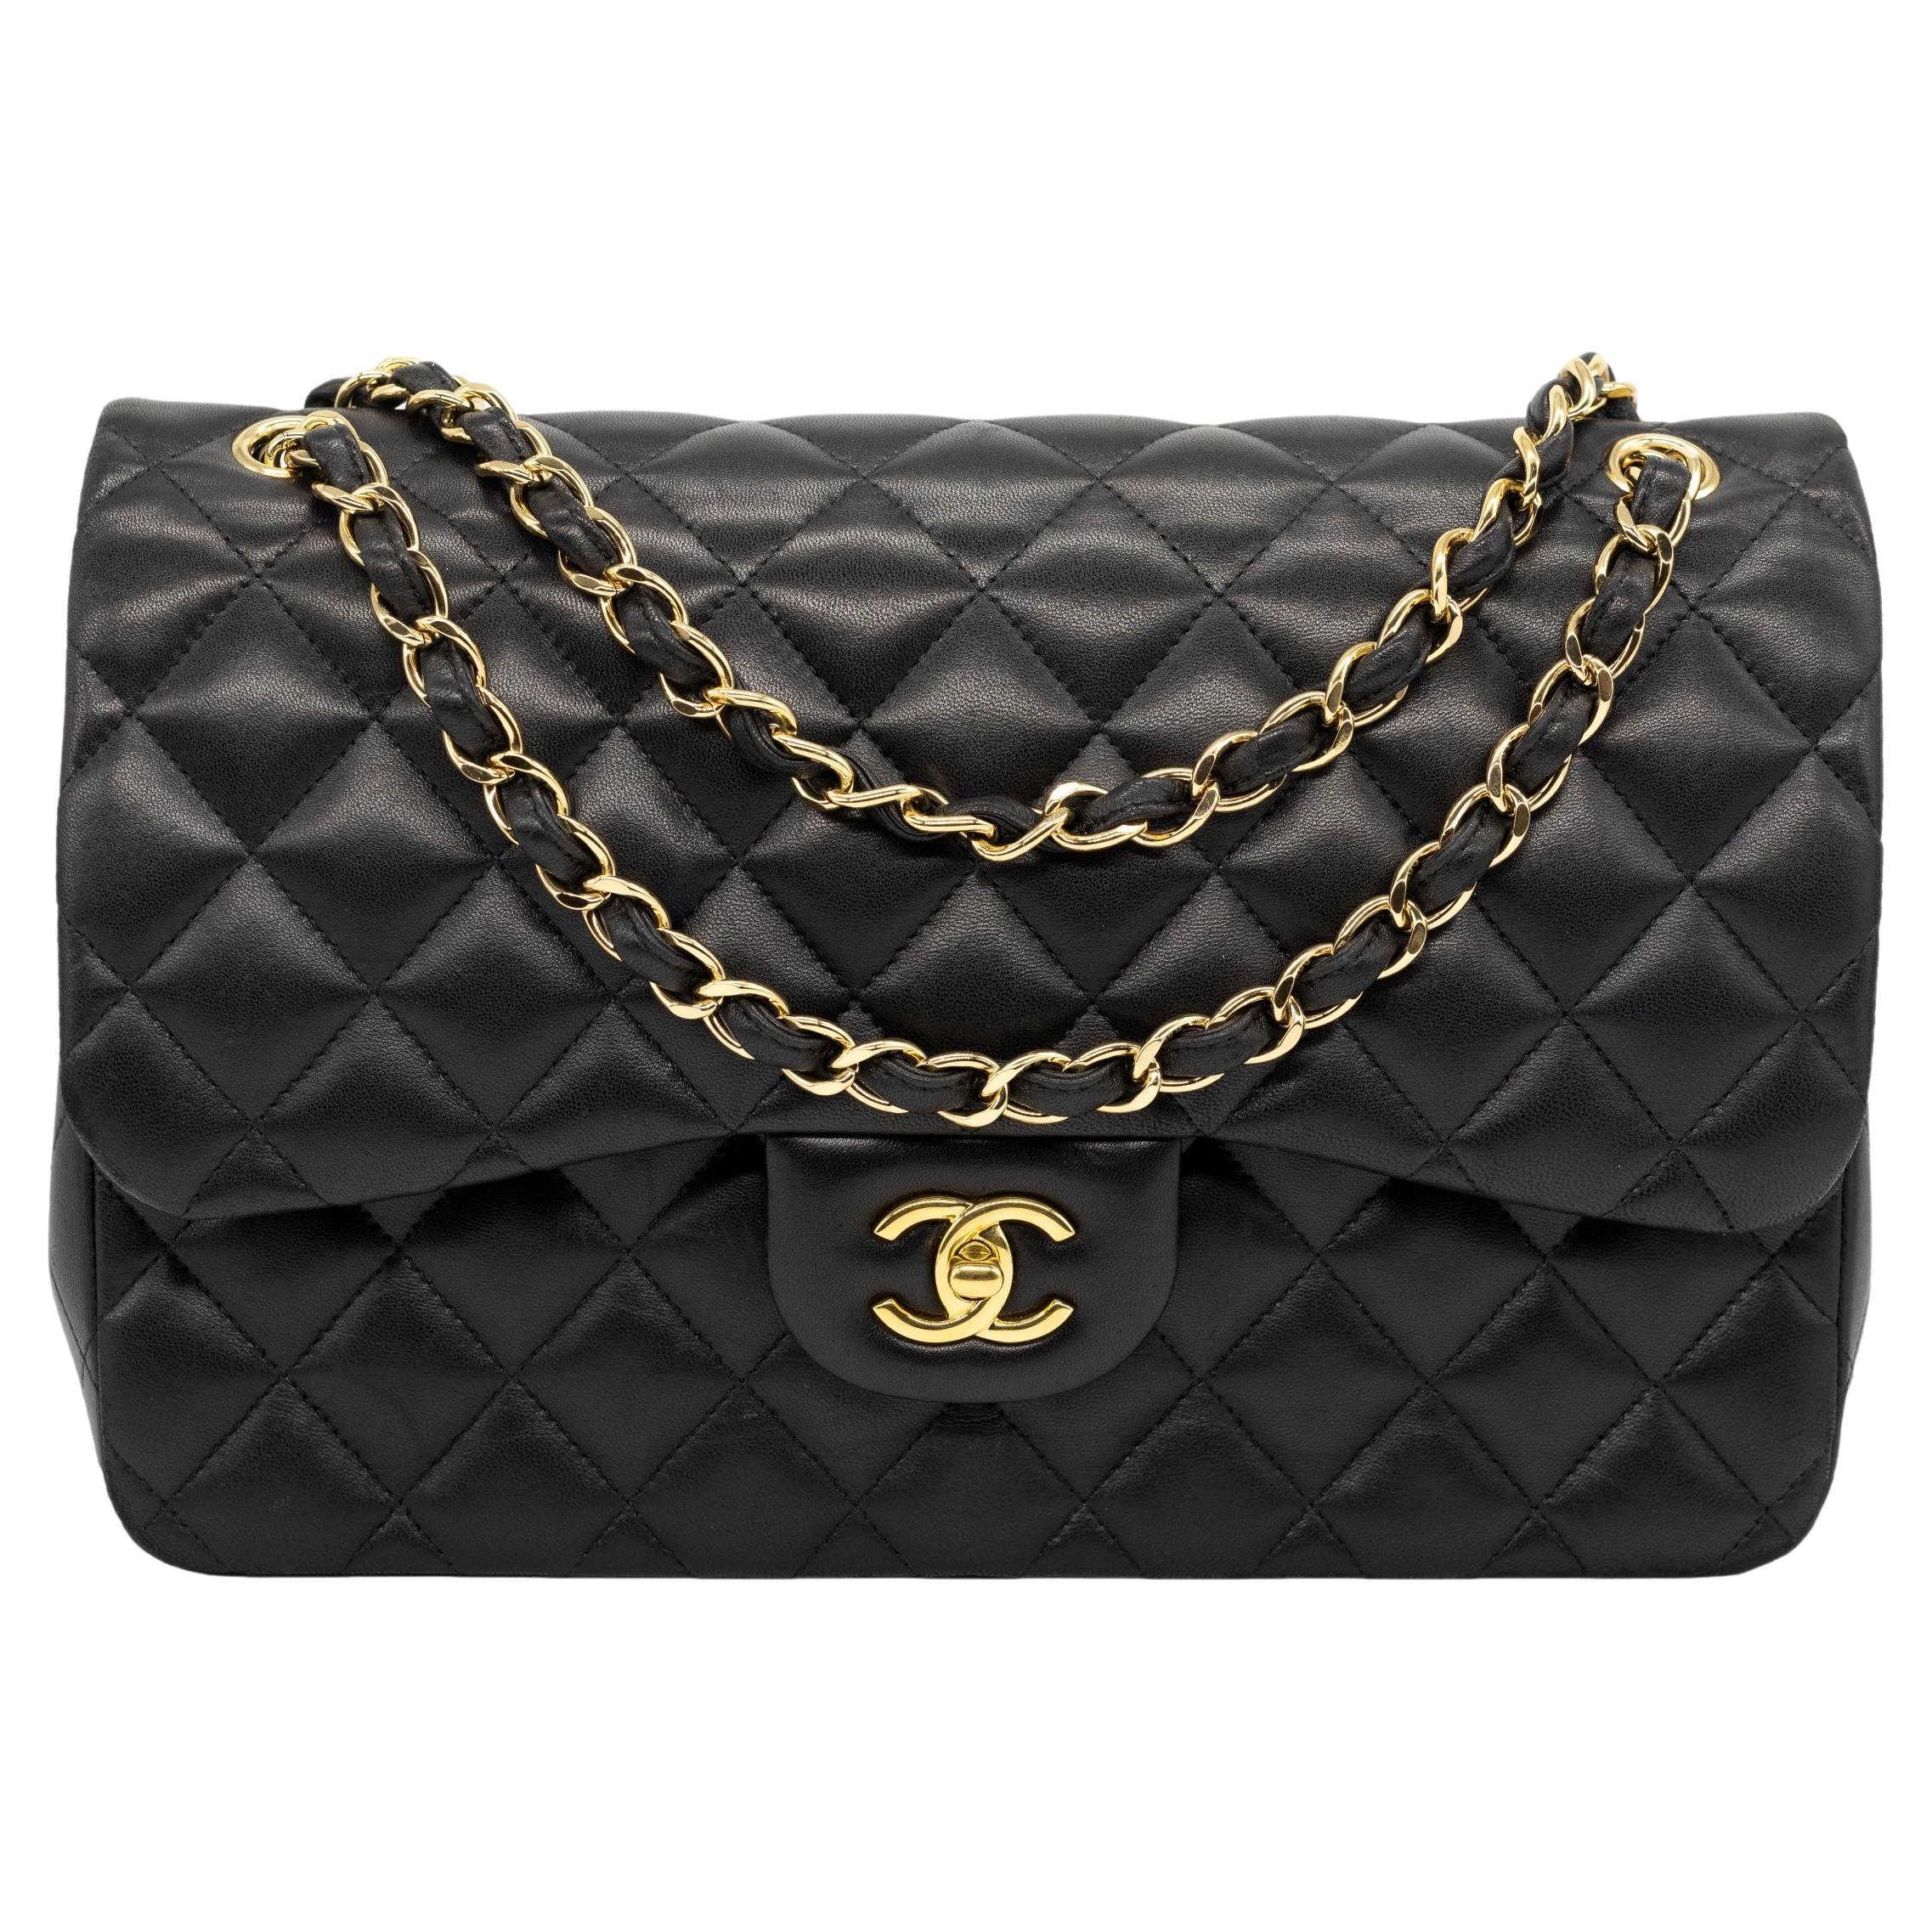 Chanel Timeless Black Jumbo Double Flap Quilted Lambskin Shoulder Bag, 2014.